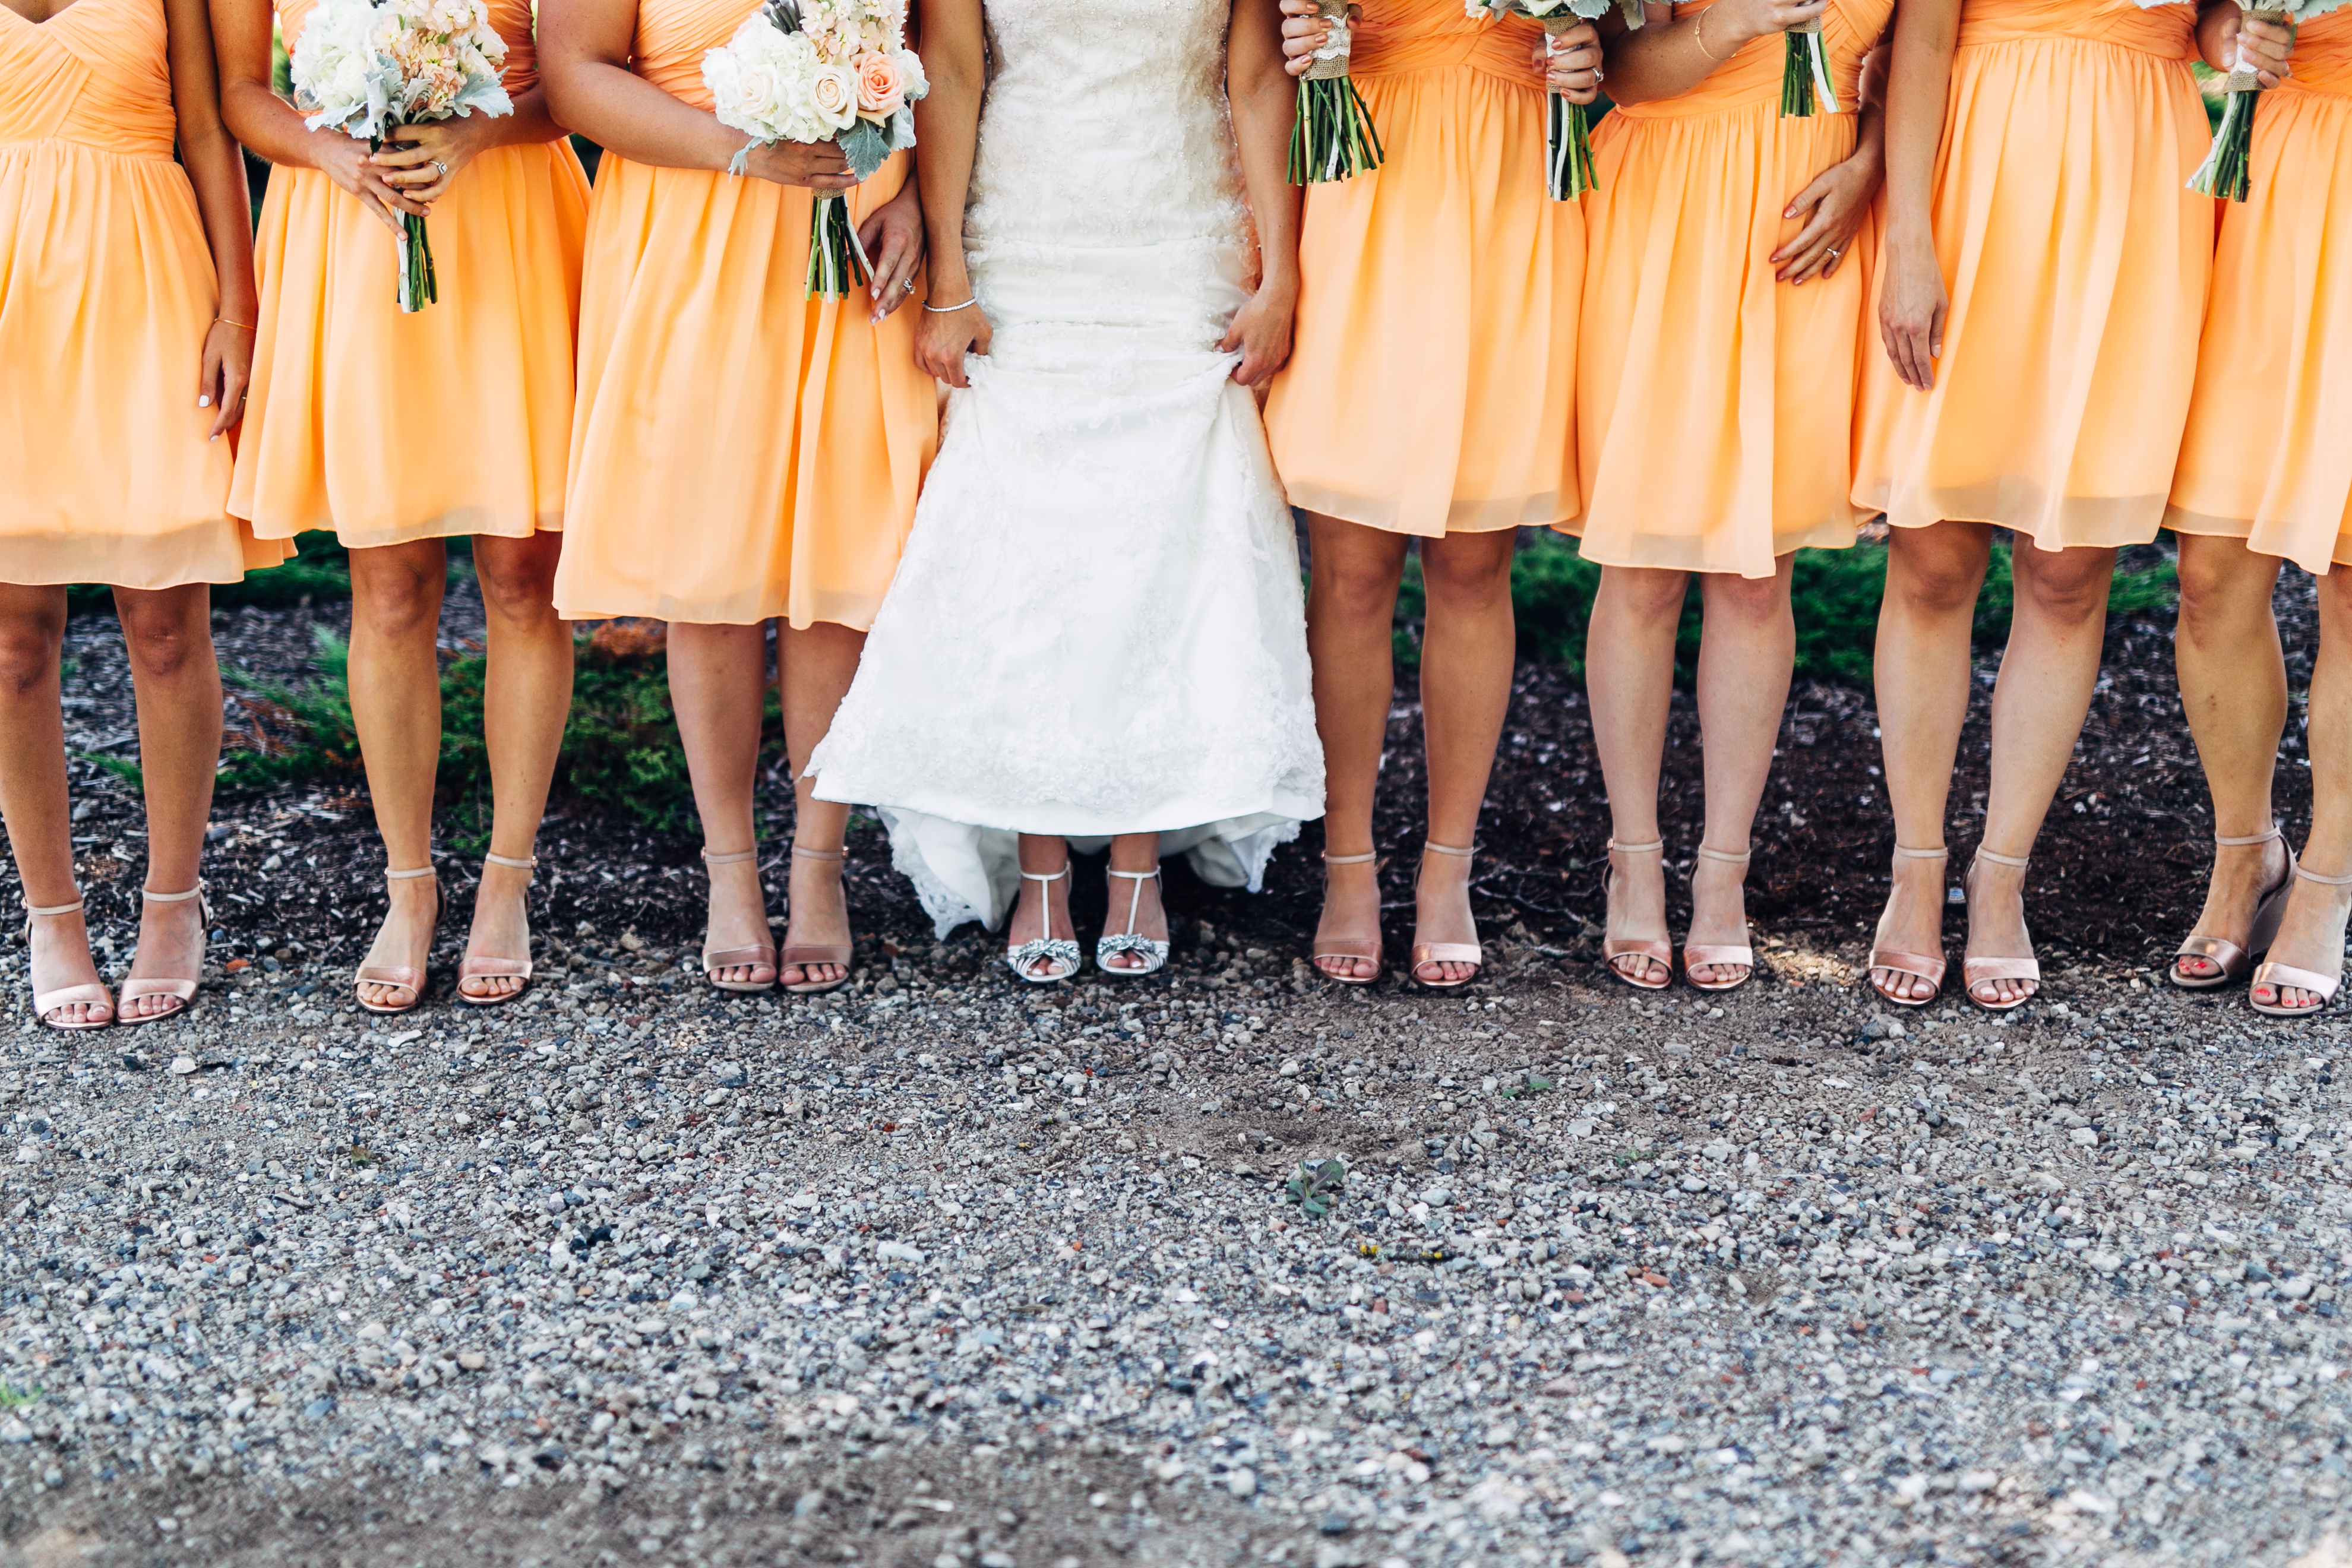 A photo of a bride with her bridal party.